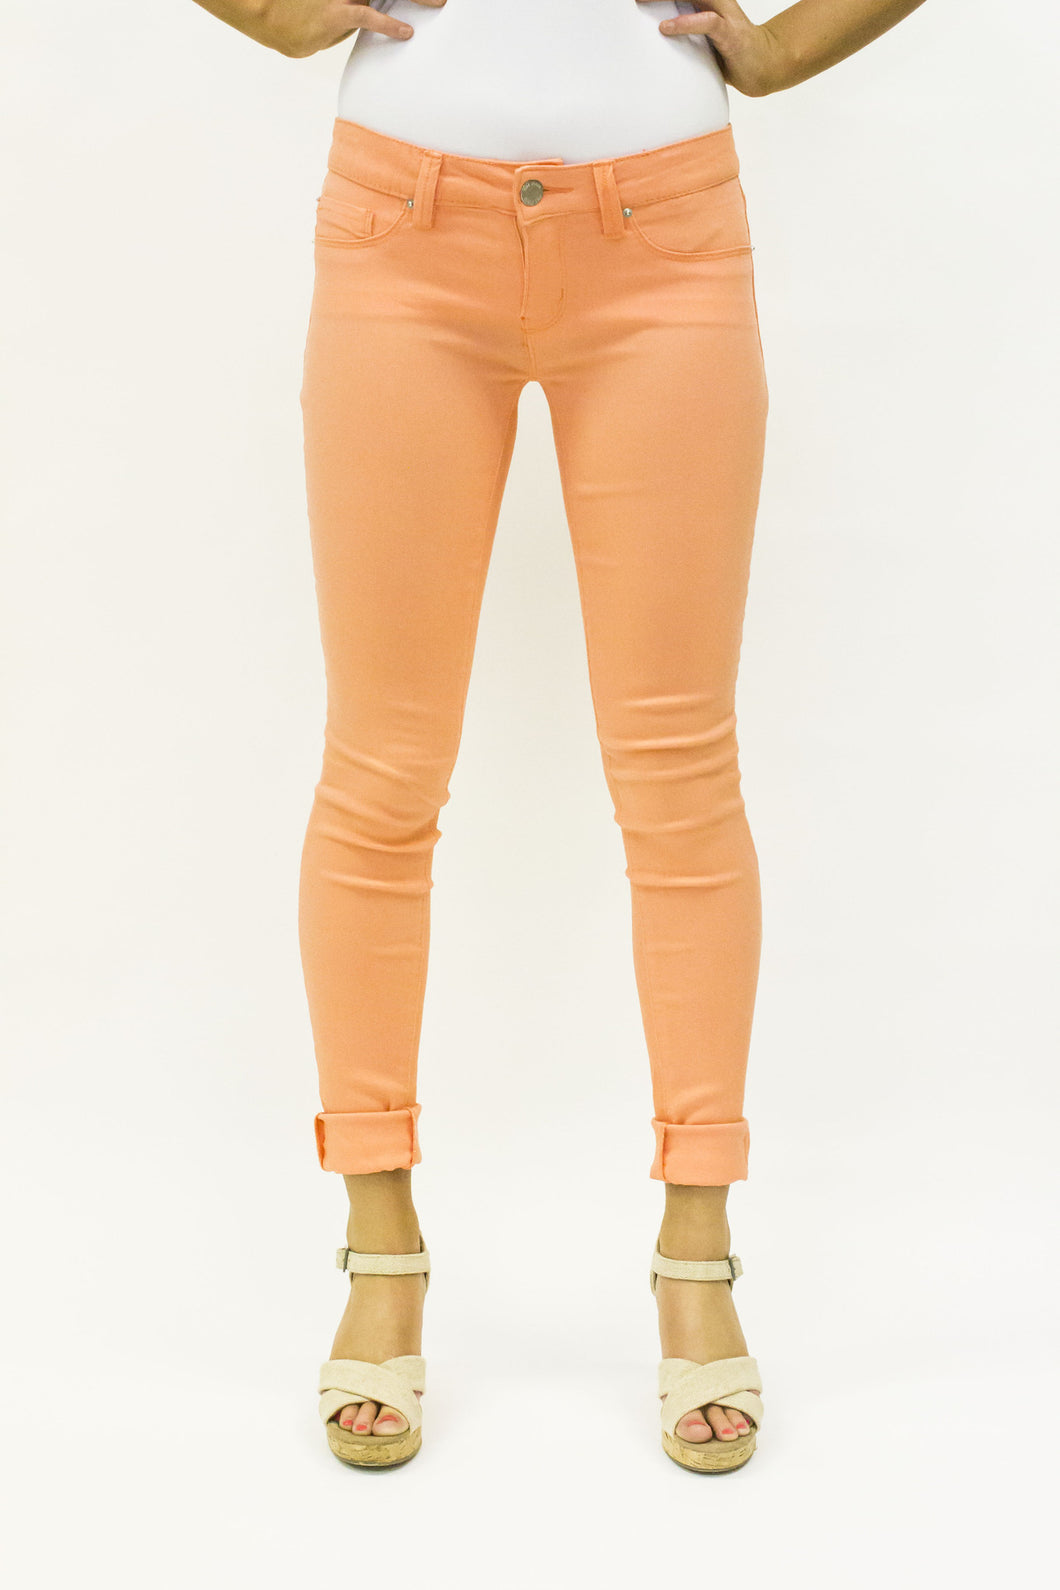 YMI Royalty For You Junior Hyper Stretch Skinny Nectarine | All Dec'd Out